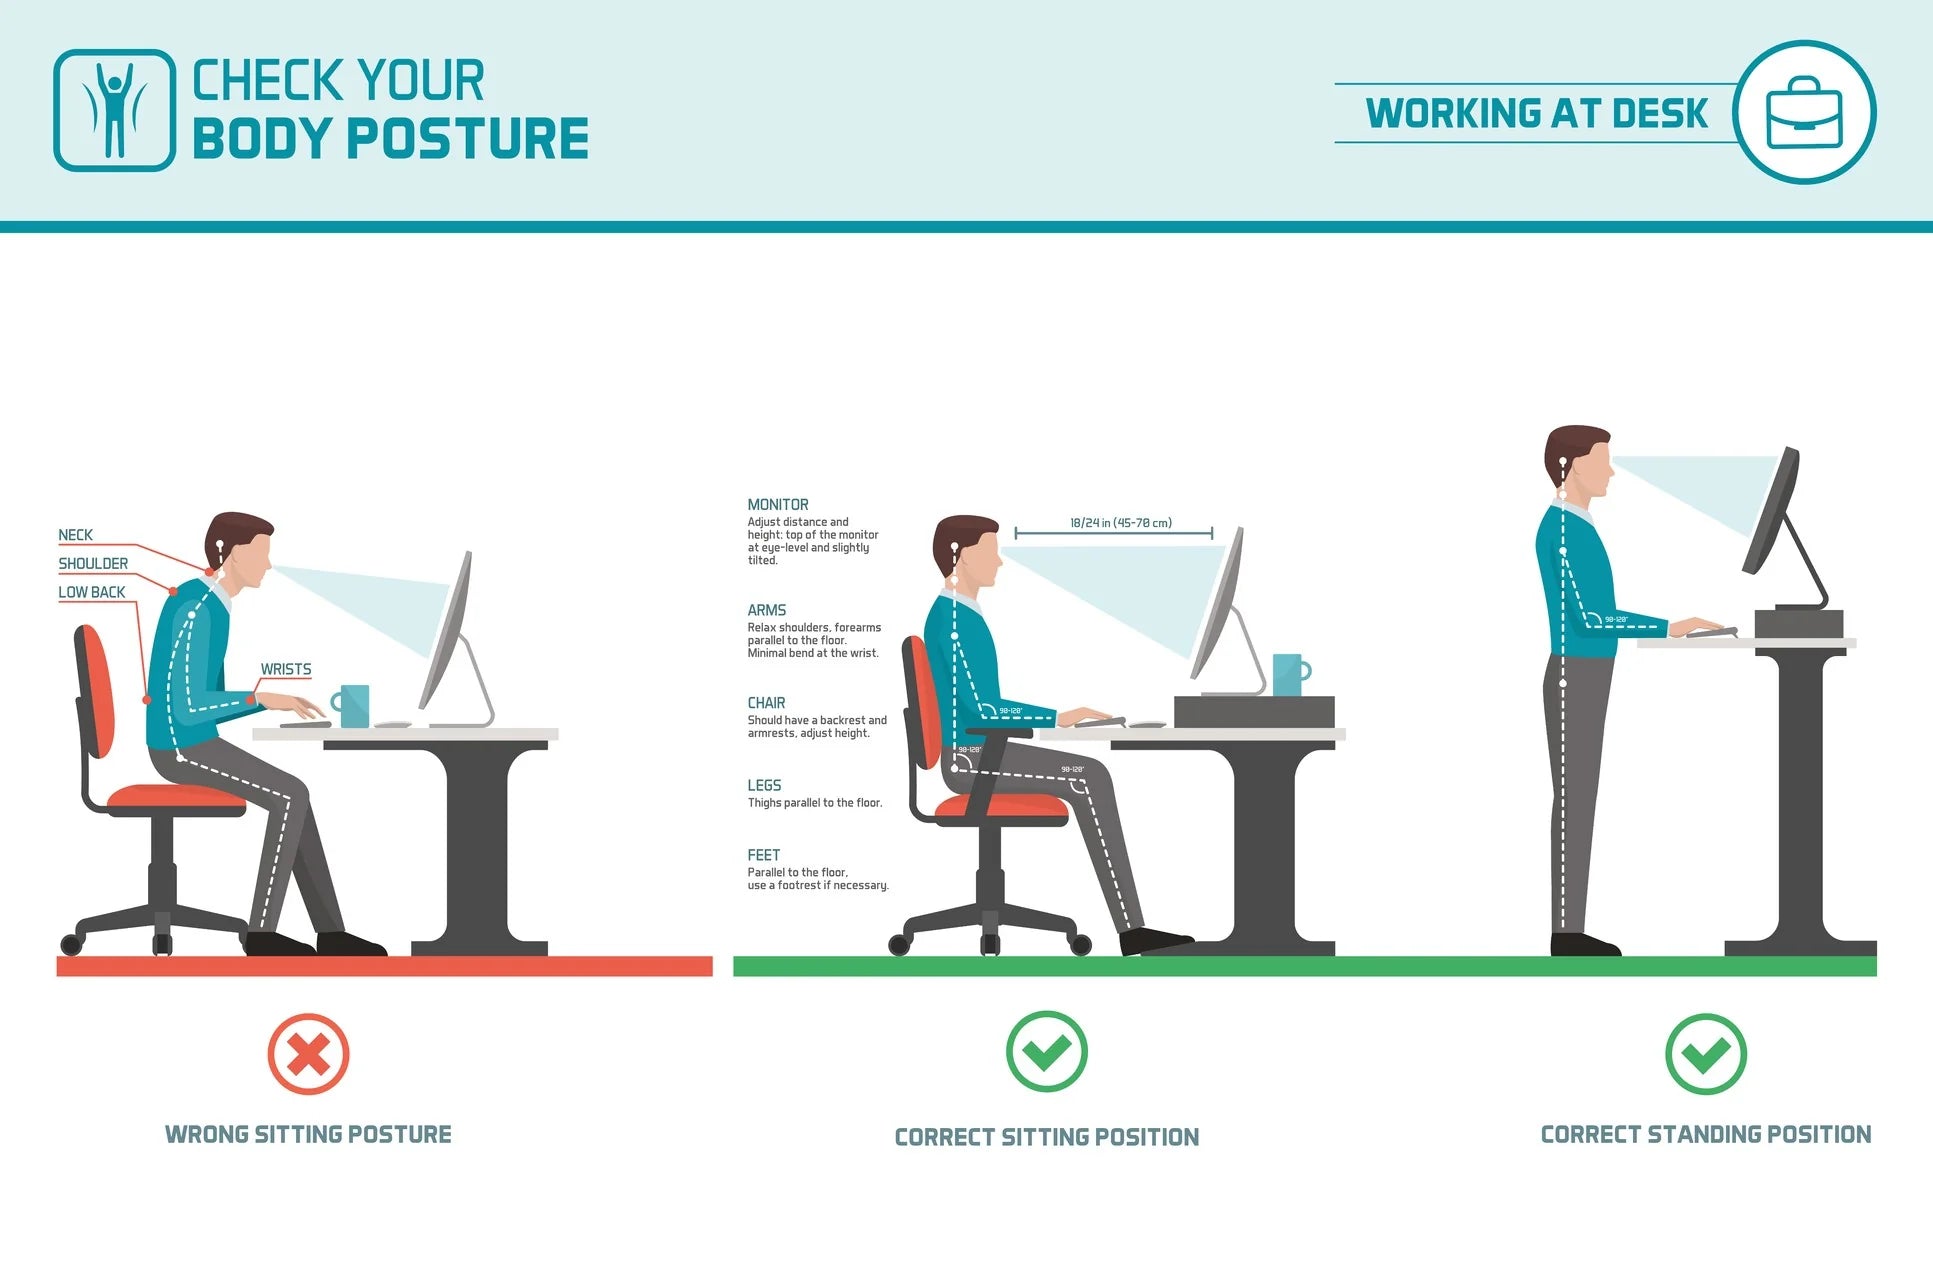 Diagram showing the correct body posture when standing and sitting at a desk. The monitor should be 18-24 inches from your face at eye-level. Your arms should be relaxed, with forearms parallel to the floor.